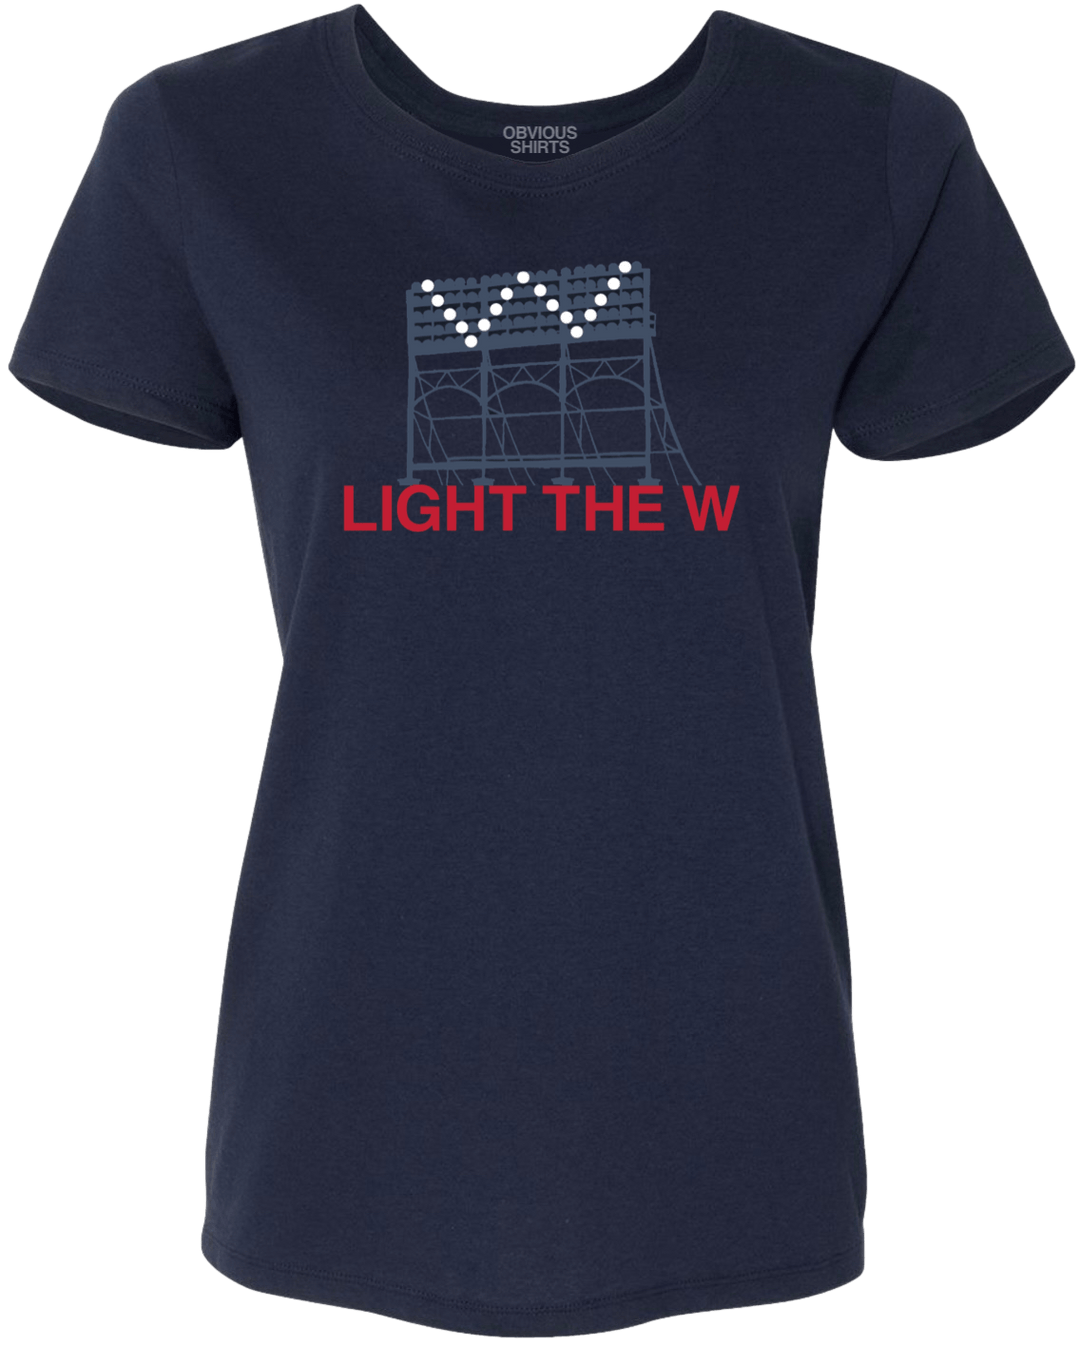 LIGHT THE W. (WOMEN'S CREW) - OBVIOUS SHIRTS